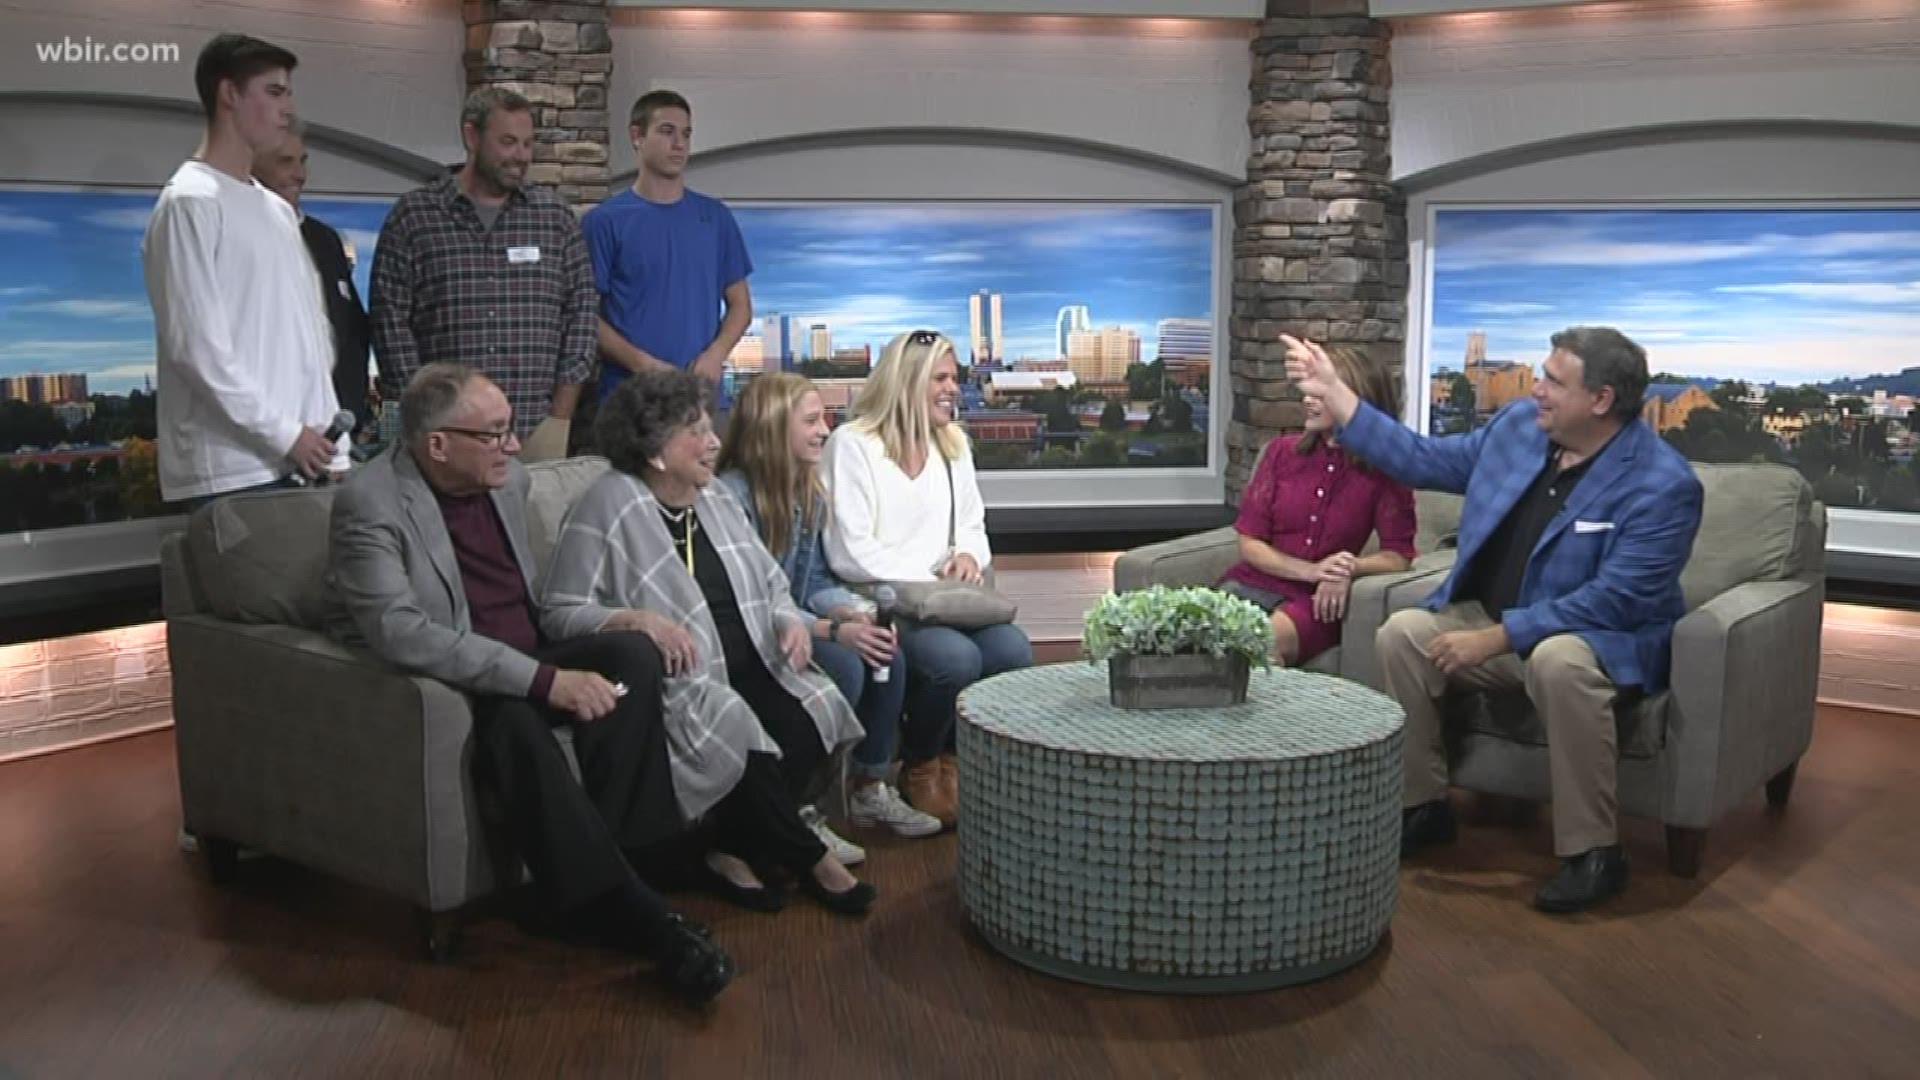 WBIR anchor Russell Biven was surprised with a celebration of 20 years at the station. His mother, wife, children and more family members were special guests.